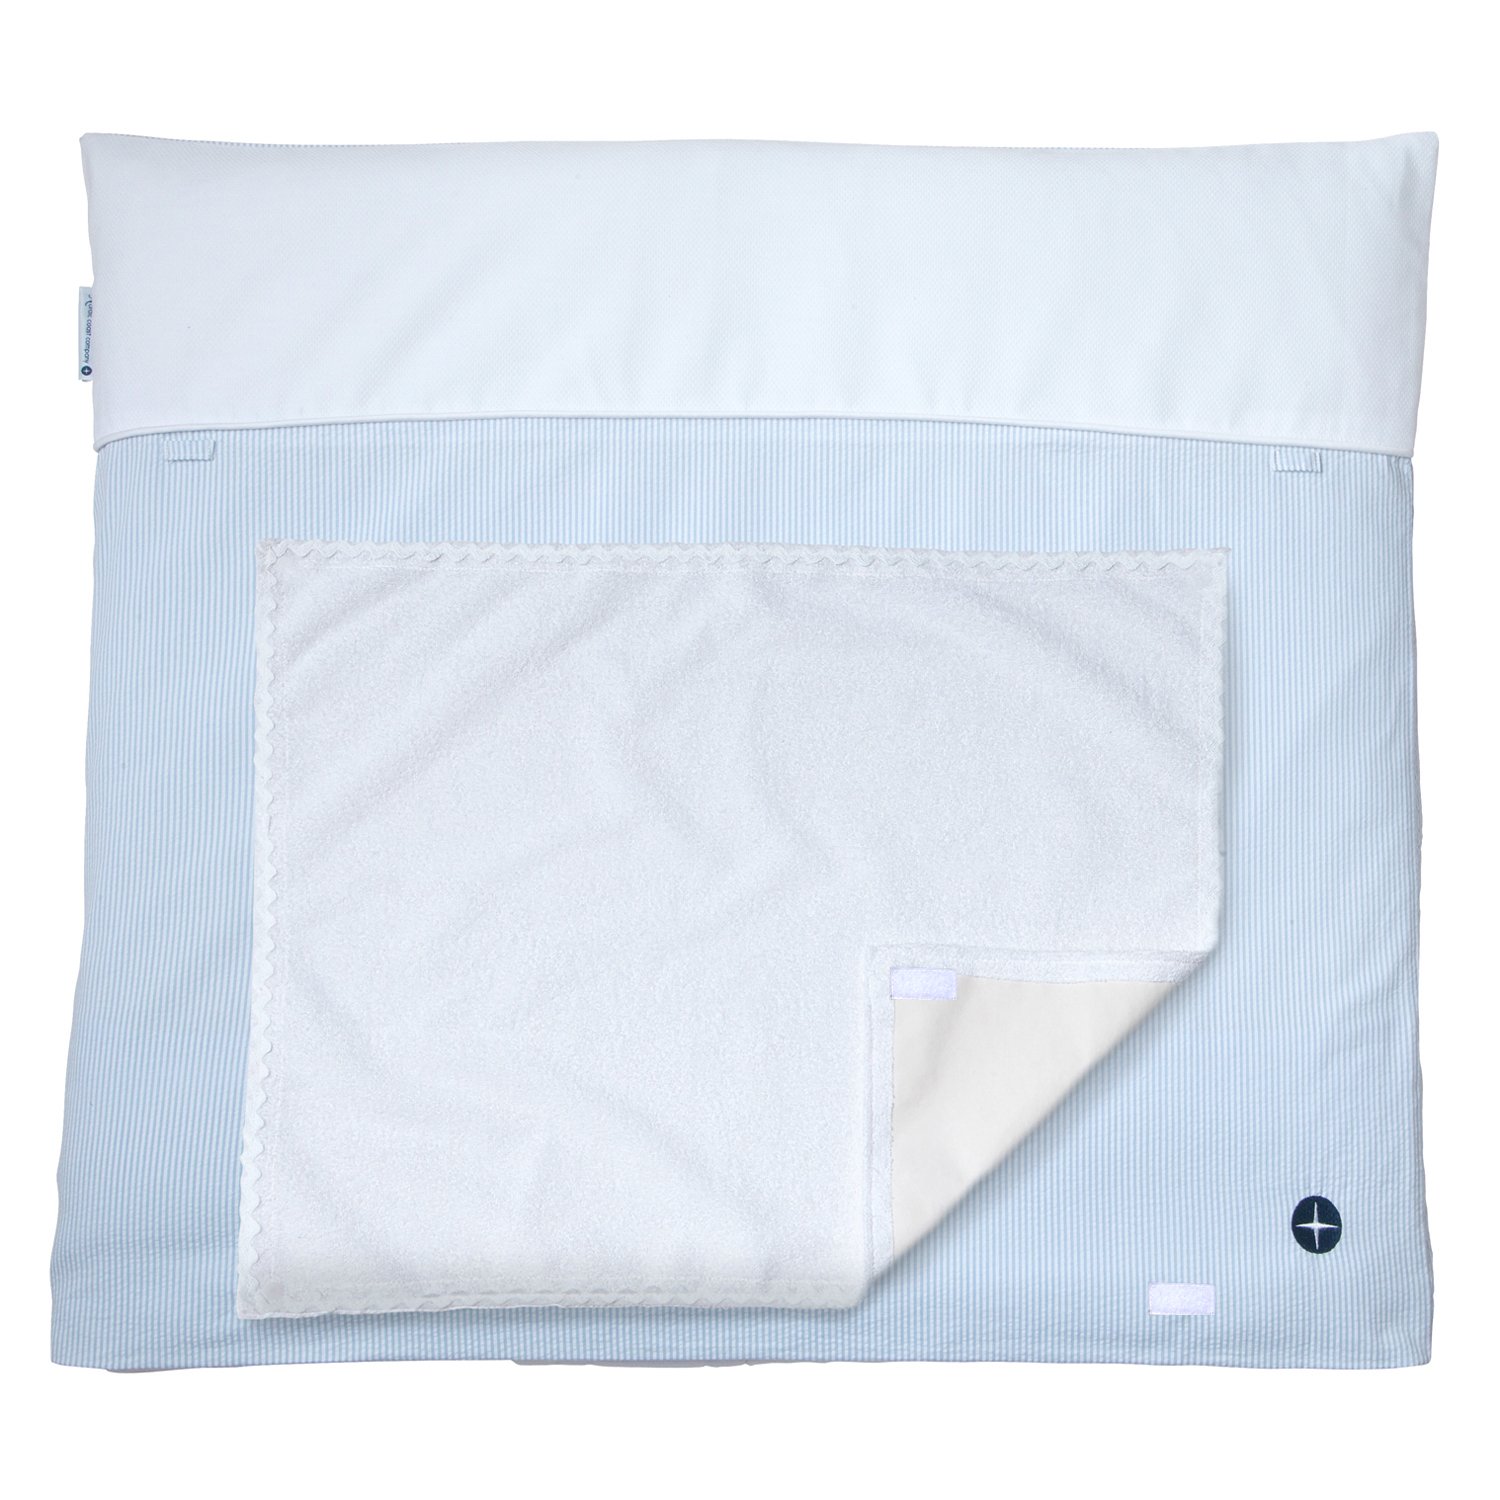 Nordic Coast 70 x 80 cm Changing Mat with Removable Terry Cloth Hand Towel Made From 100% Cotton Cover and Well Washable